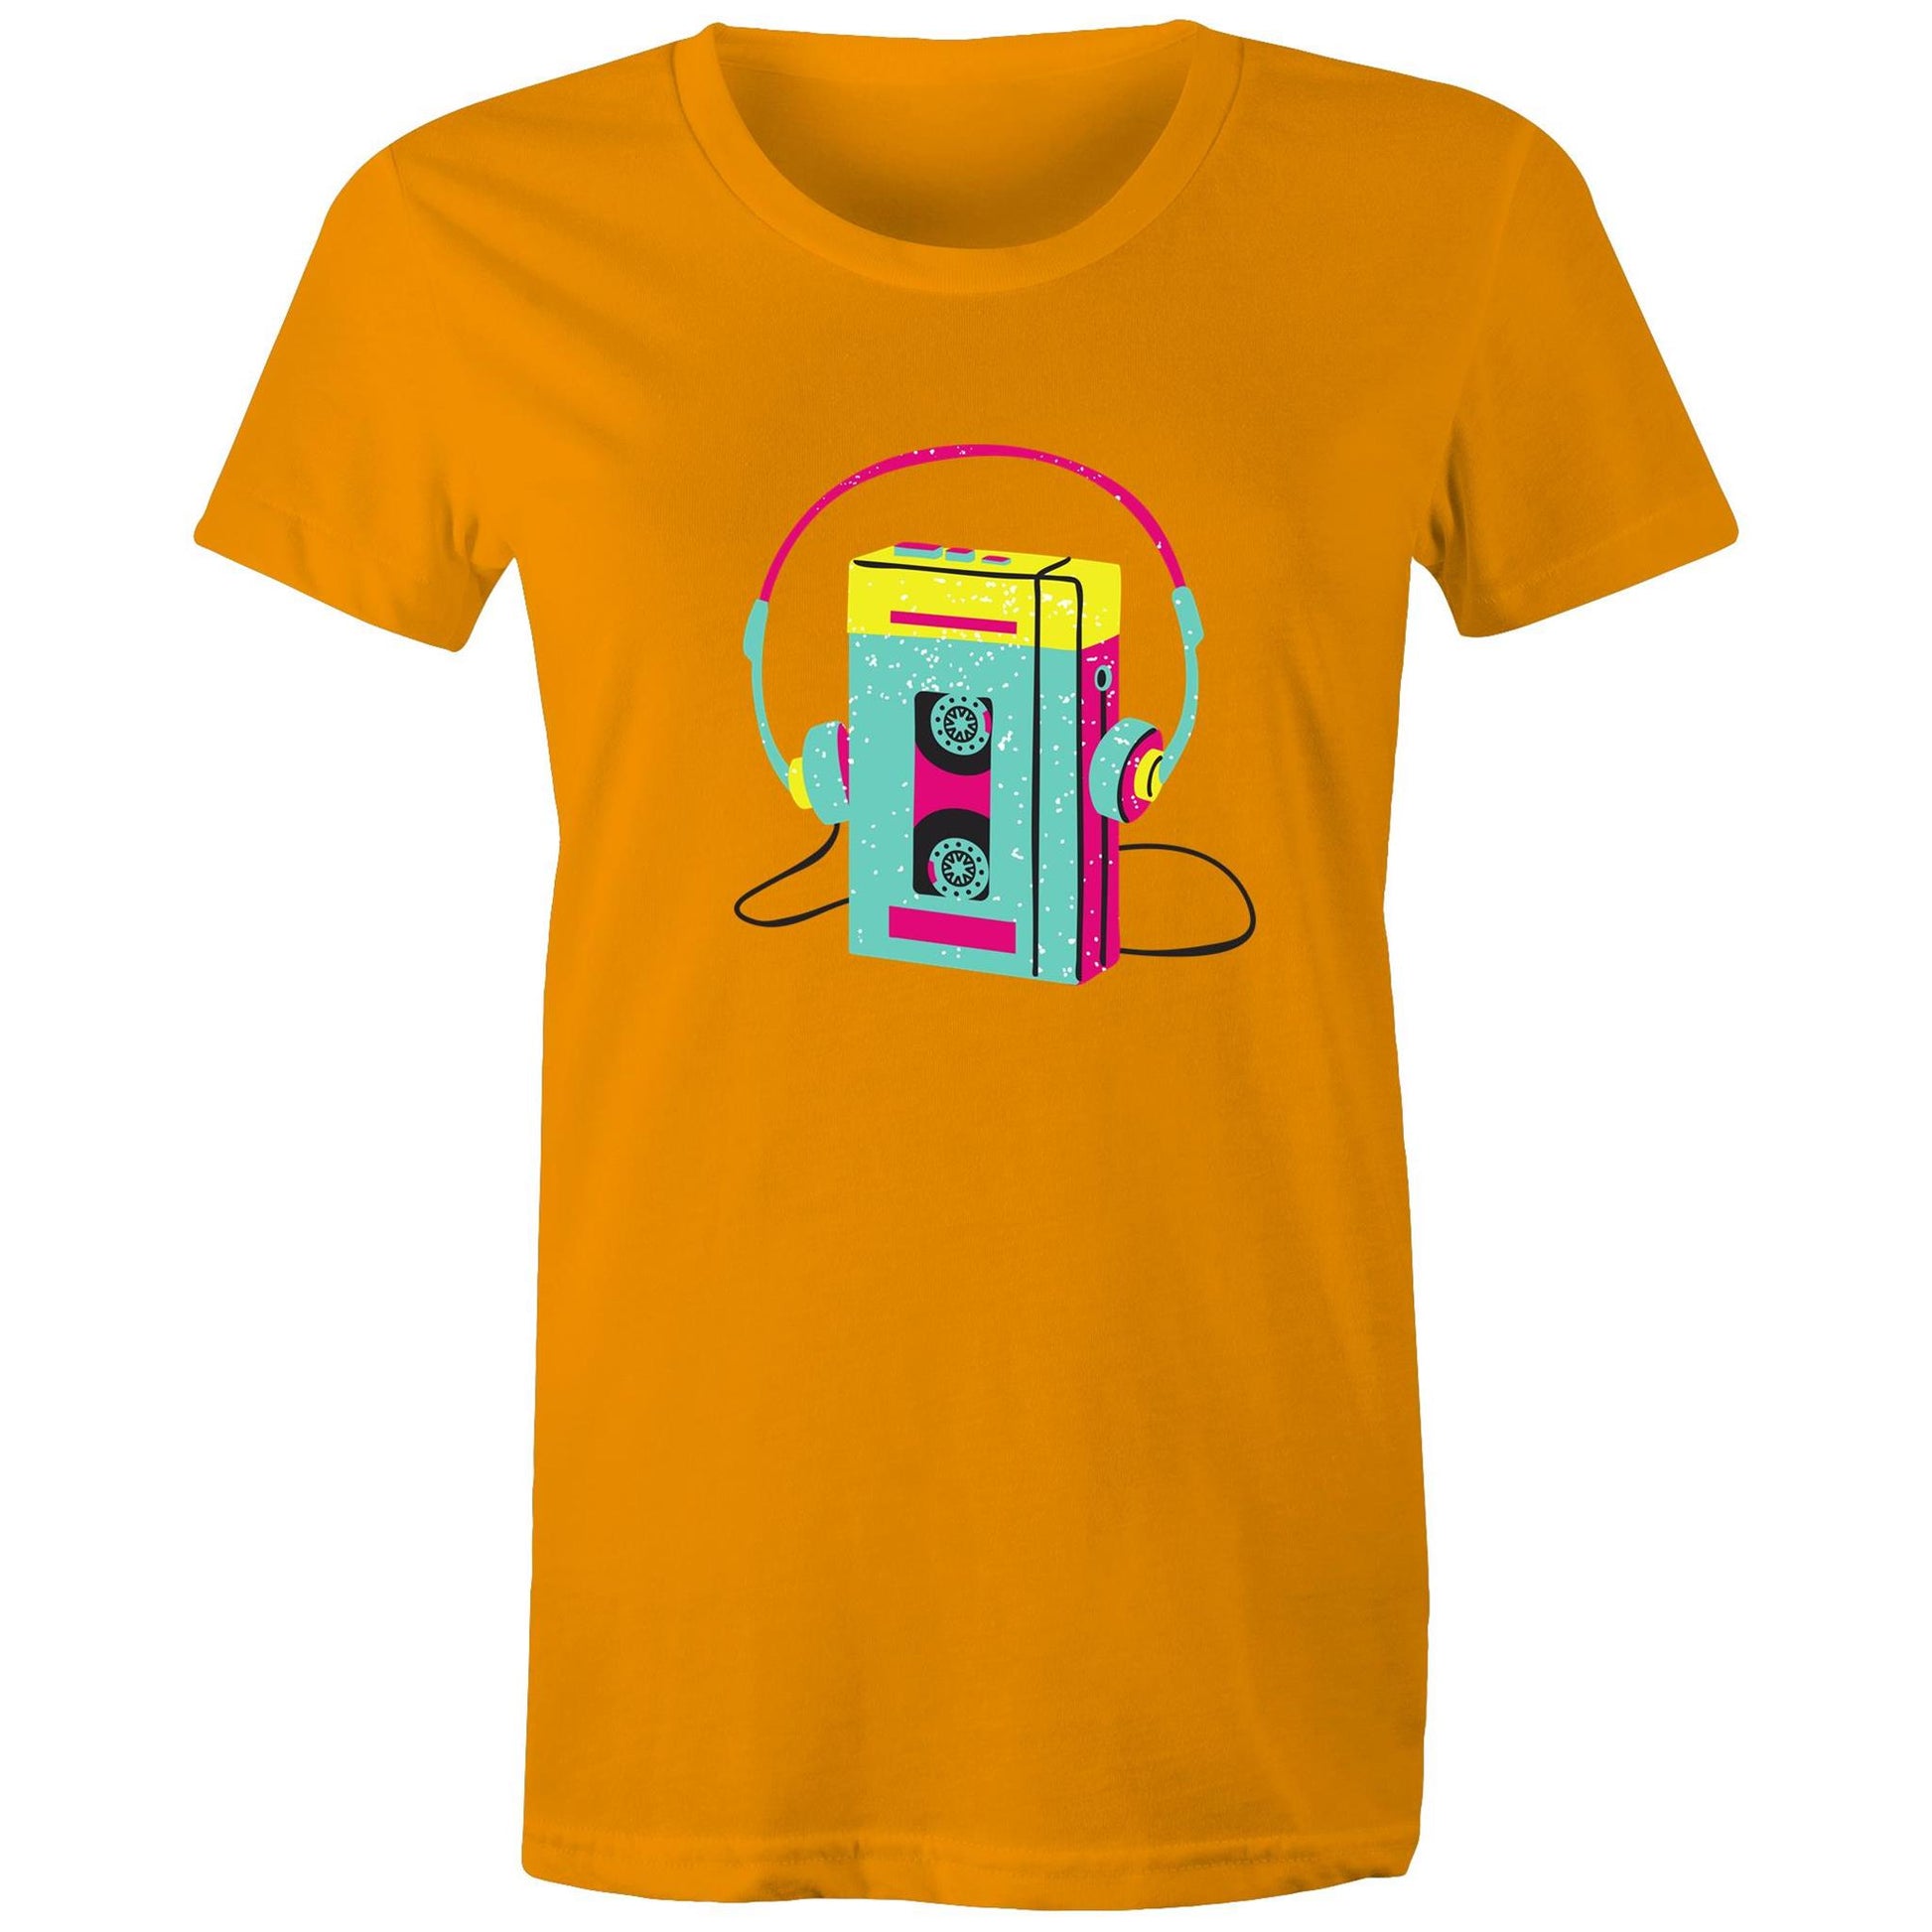 Wired For Sound, Music Player - Womens T-shirt Orange Womens T-shirt Music Retro Womens